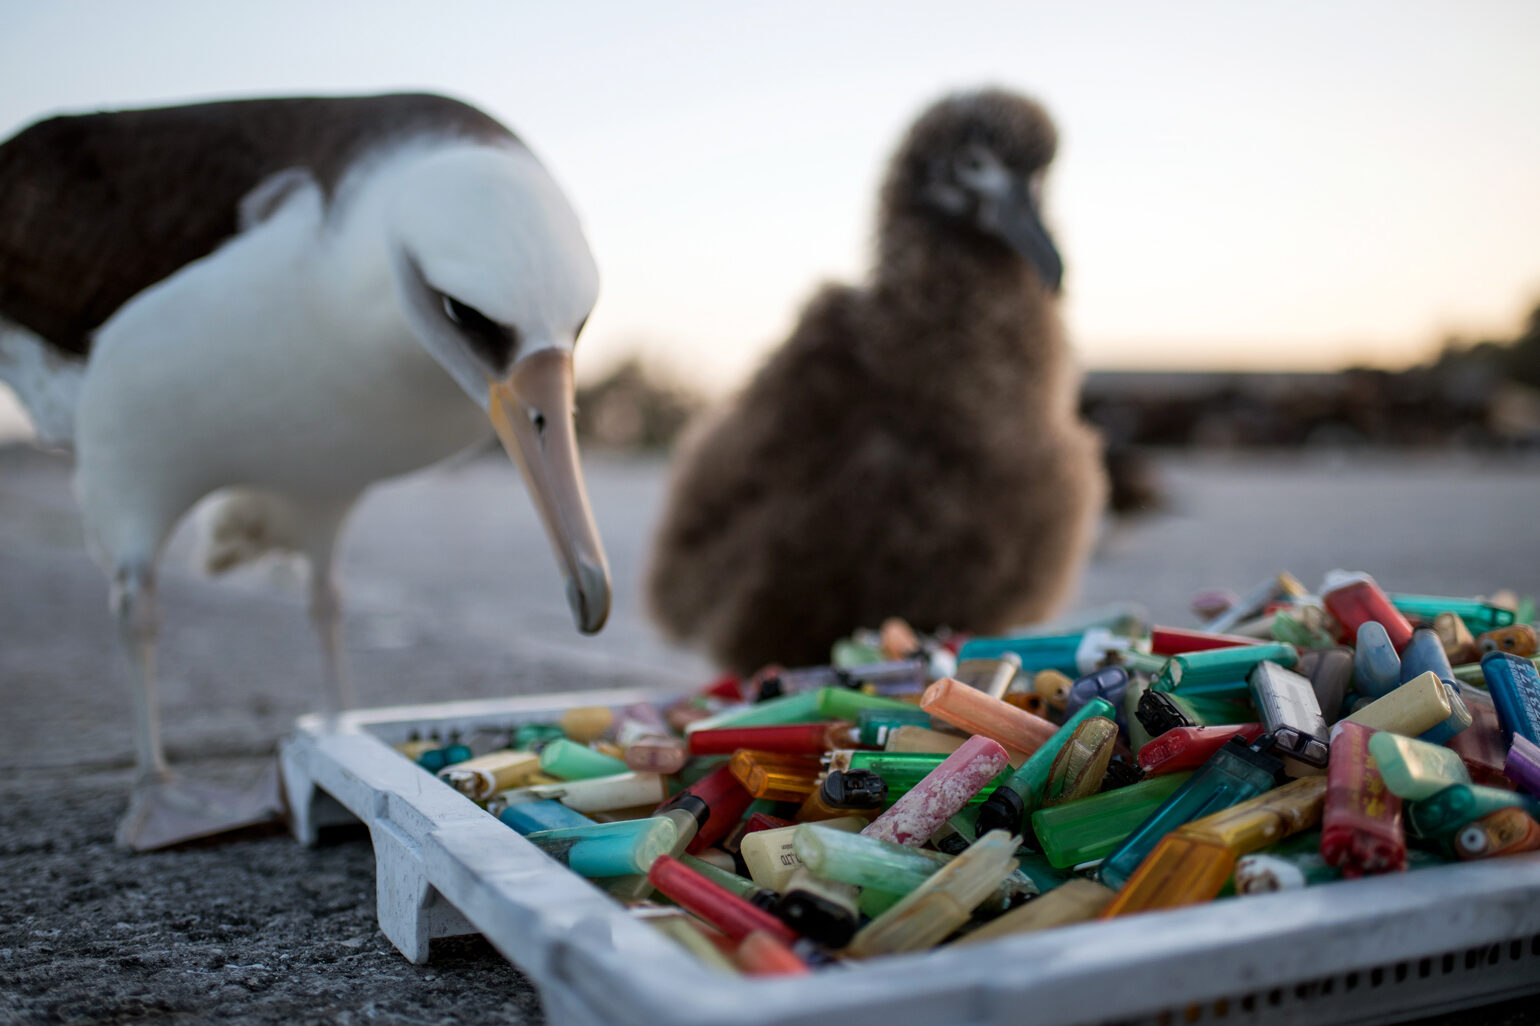 A laysan Albatross and its chick inspect a tray of plastic debris